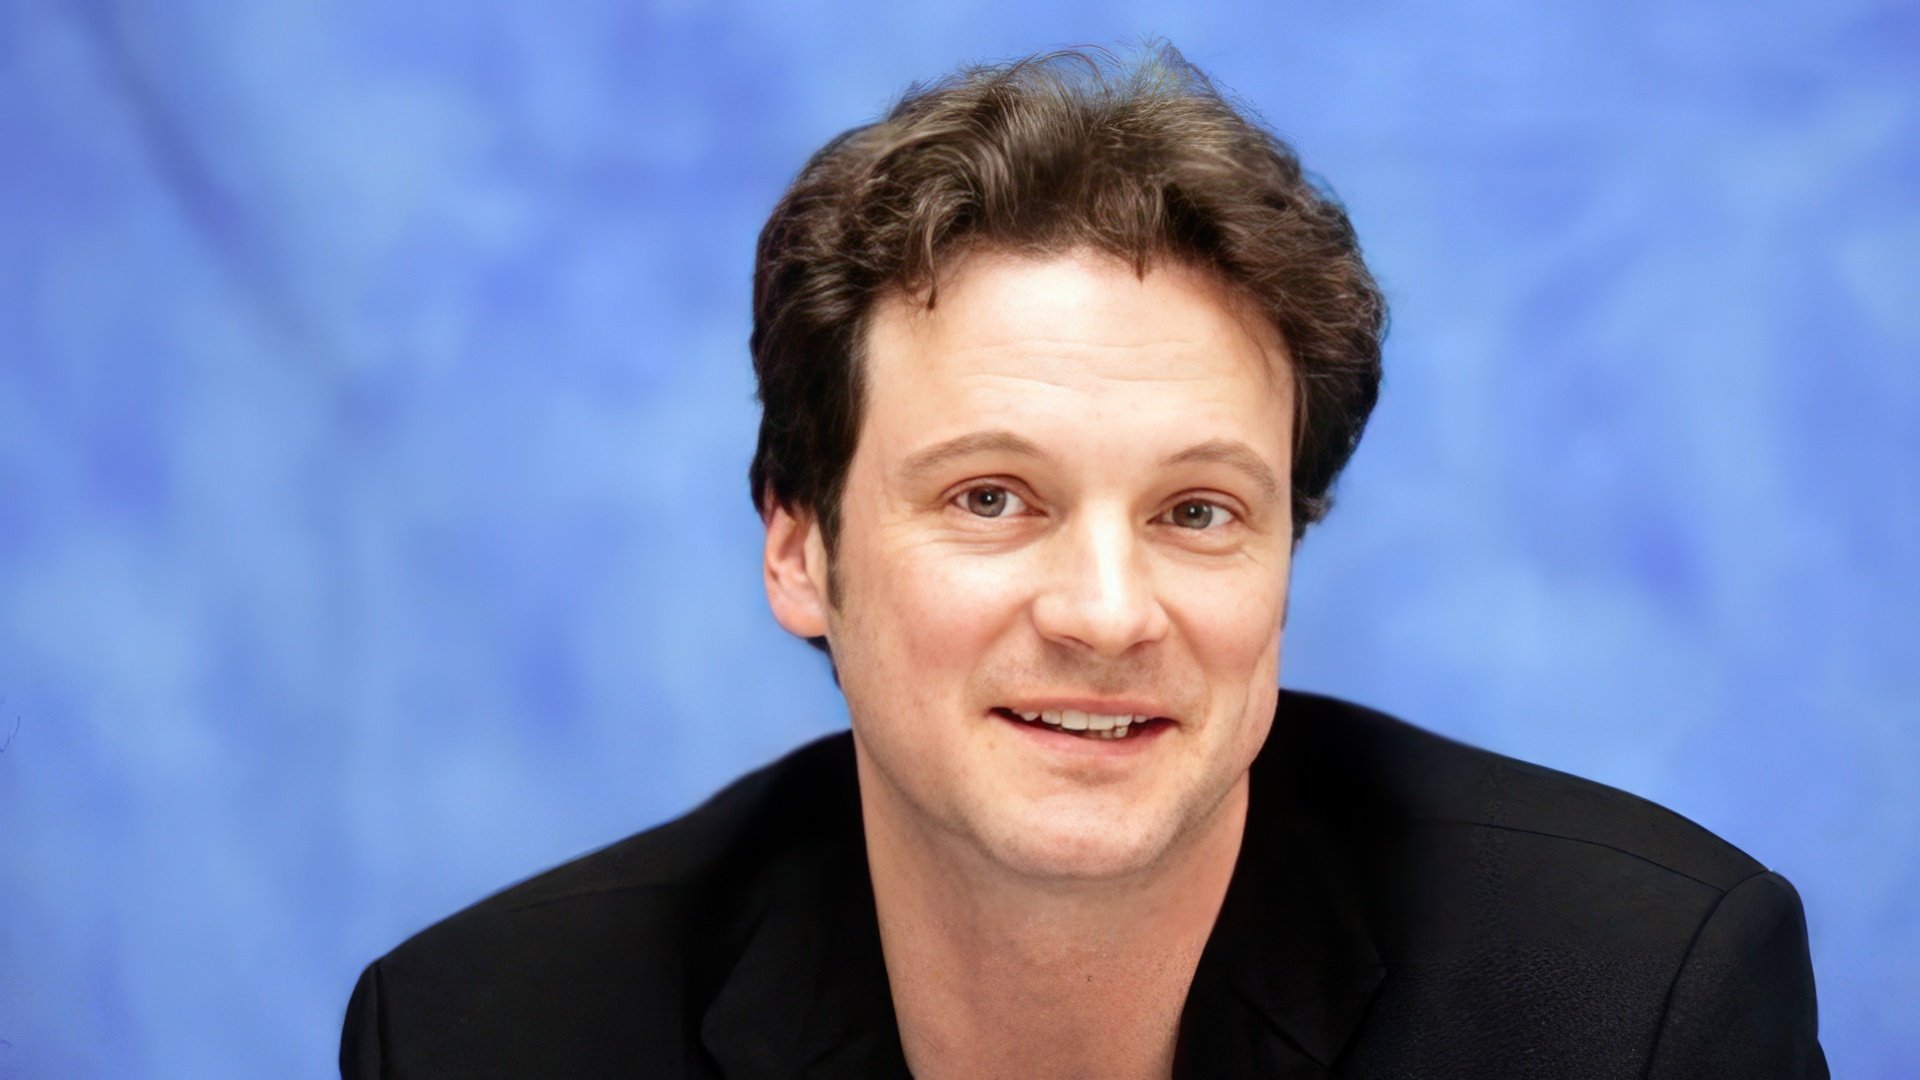 2001: Colin Firth – the world’s most handsome man according to «People»